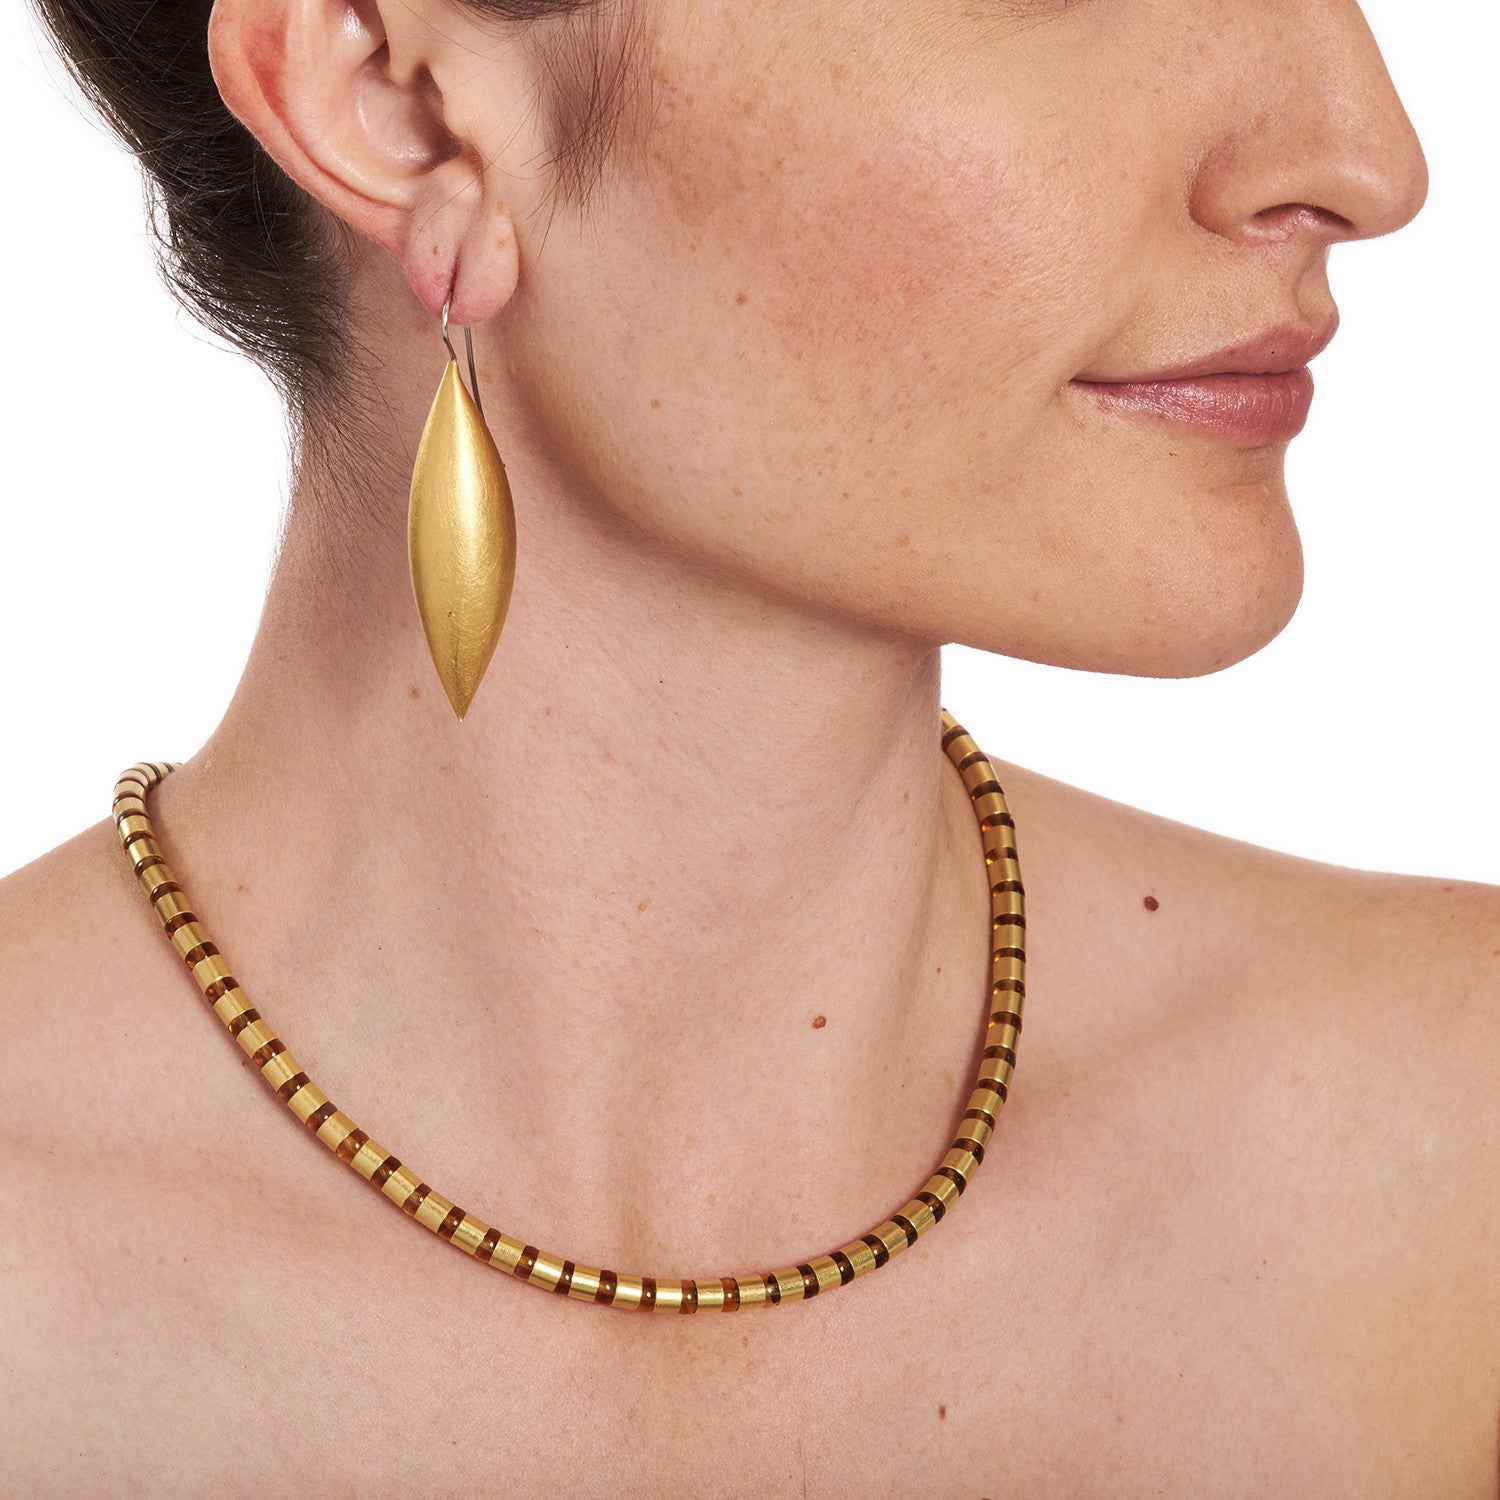 Cleopatra Gold Collier~5mm Citrine